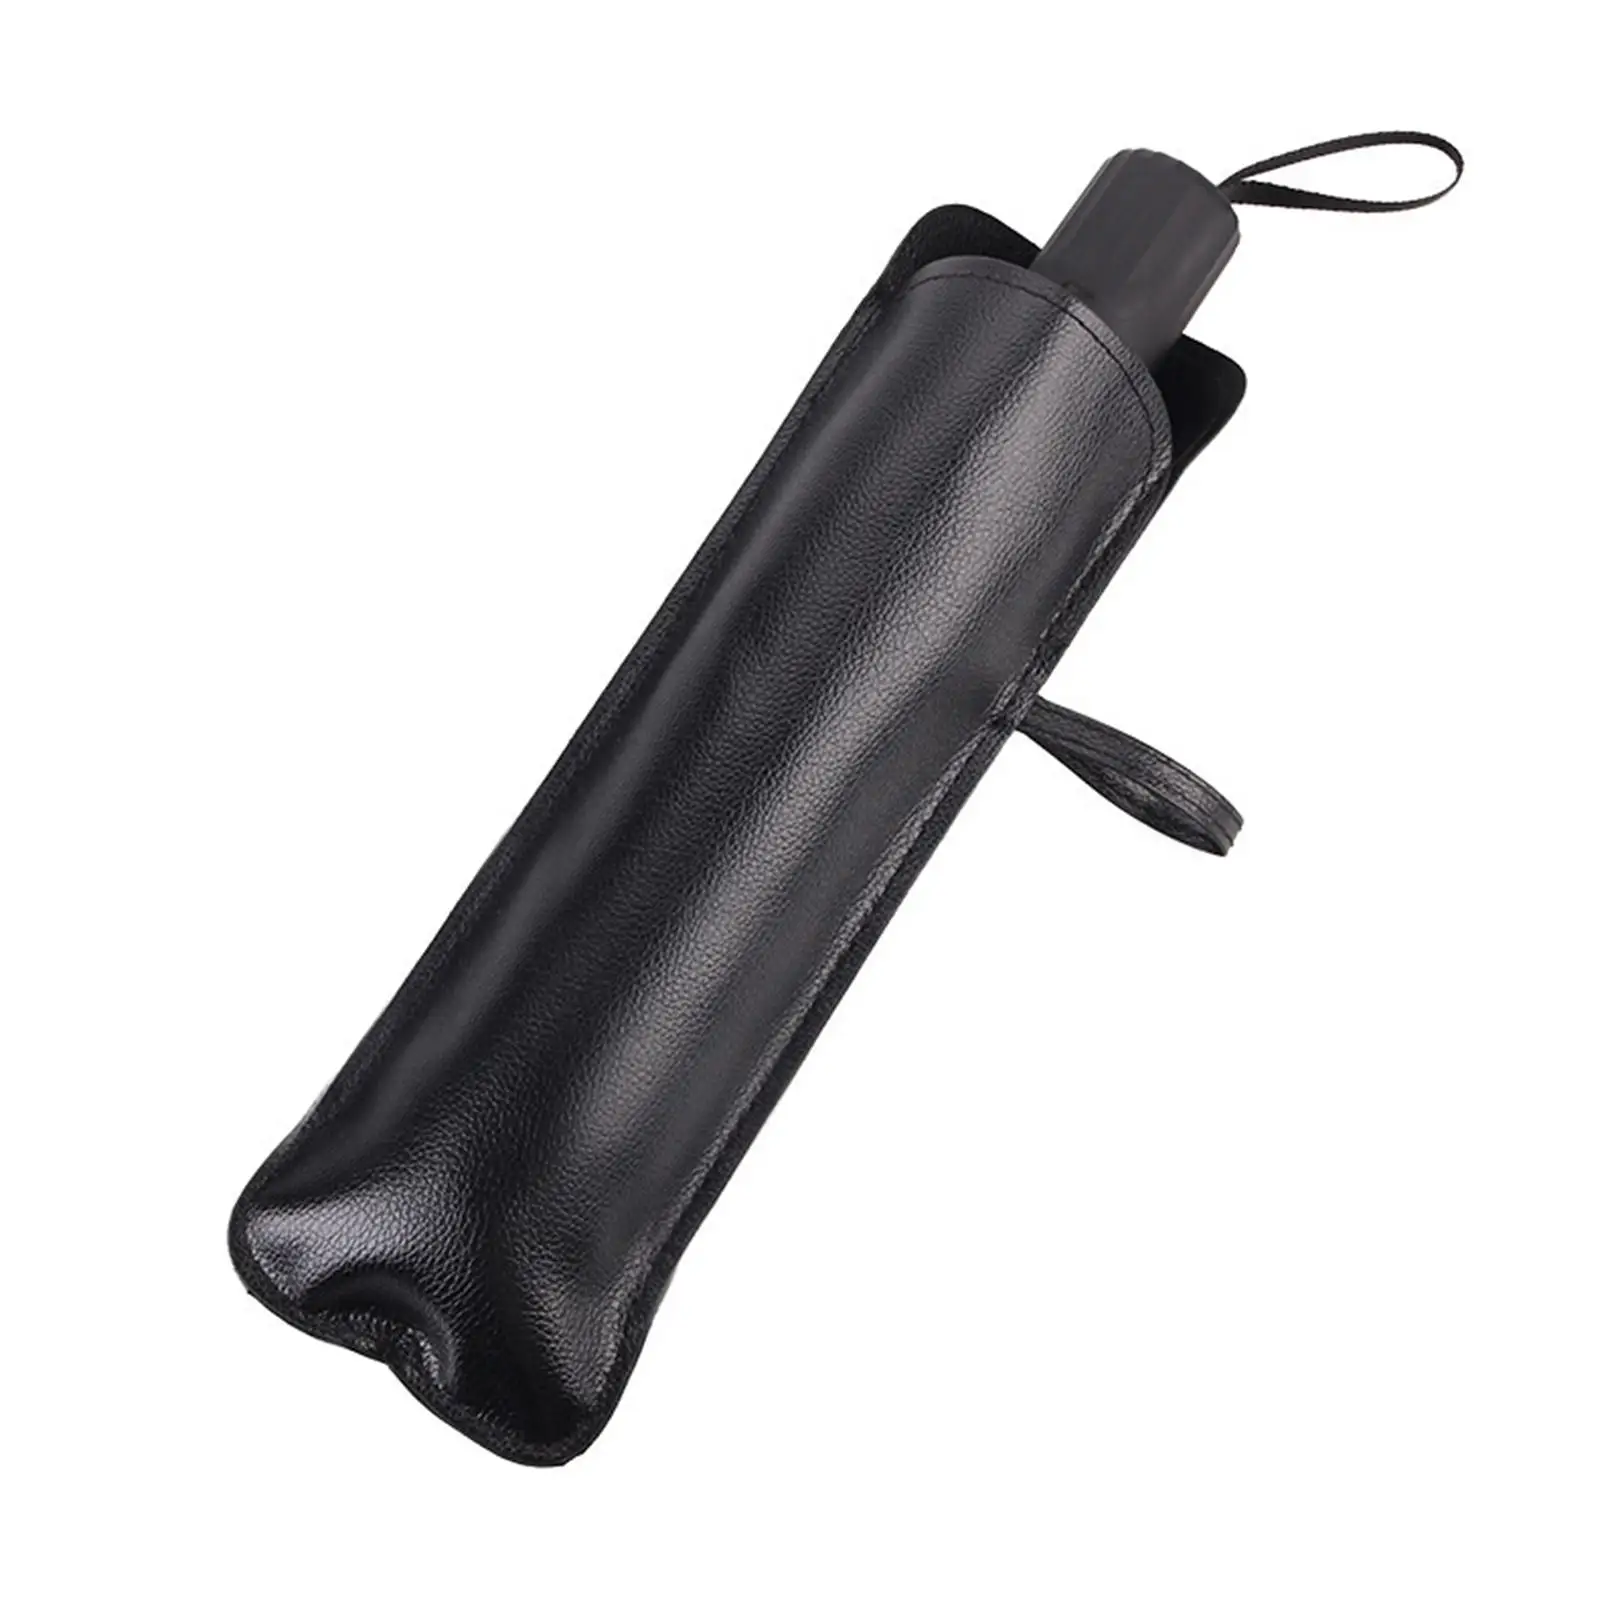 Umbrella Sleeves Covers for Wet Umbrellas Portable Umbrella Carry Bag Wet Umbrella Case Umbrella Pouches for Travel Outdoor Home